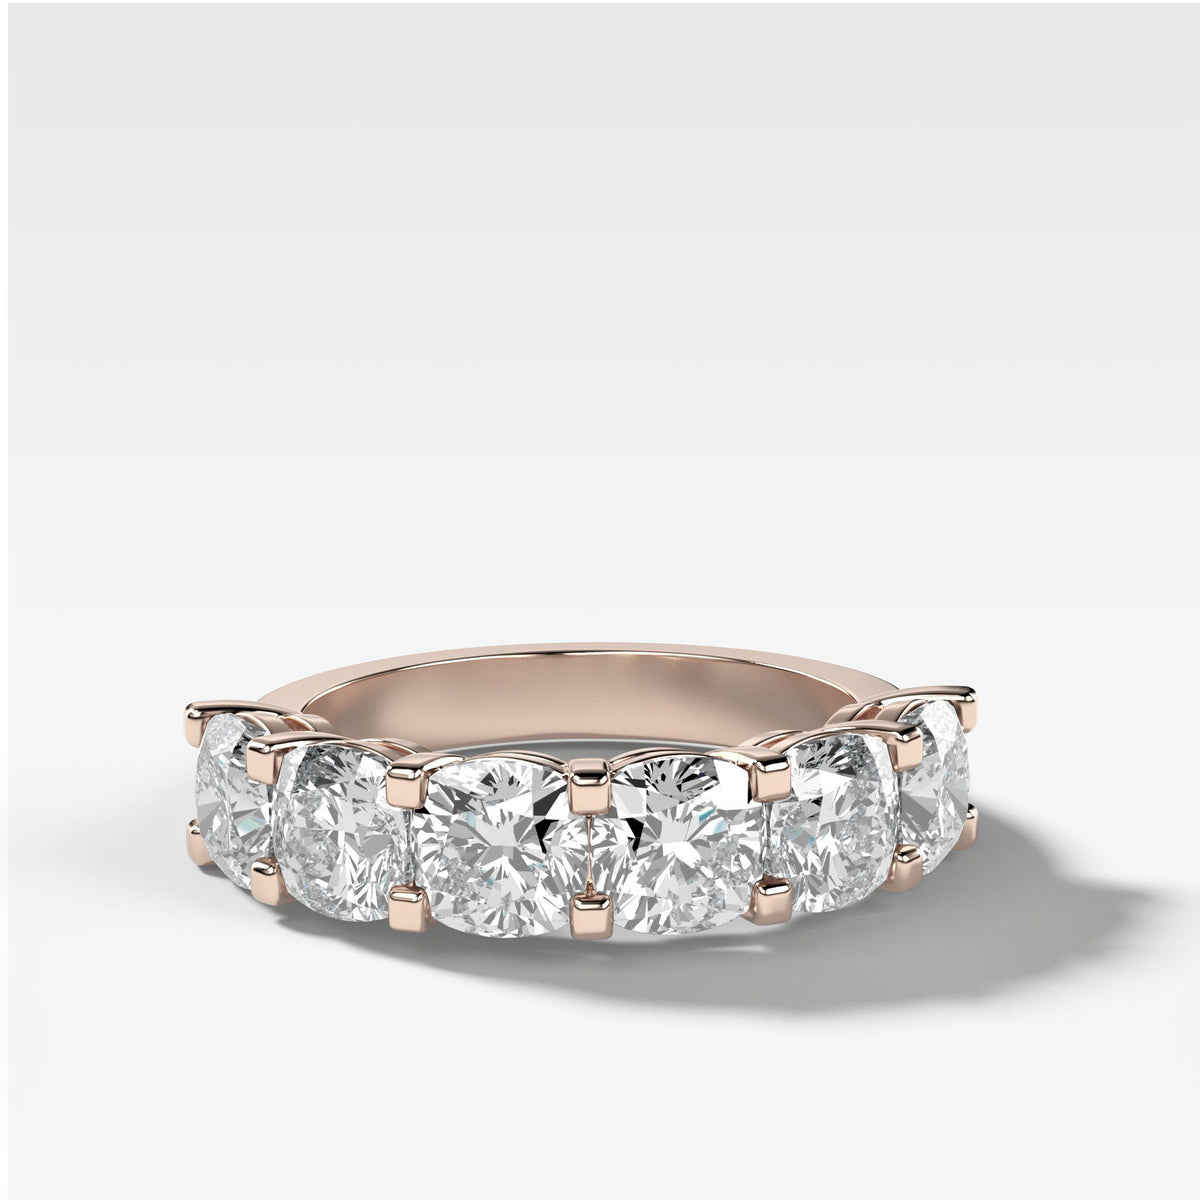 Six Stone Shared Prong Diamond Band With Cushion Cuts by Good Stone in Rose Gold